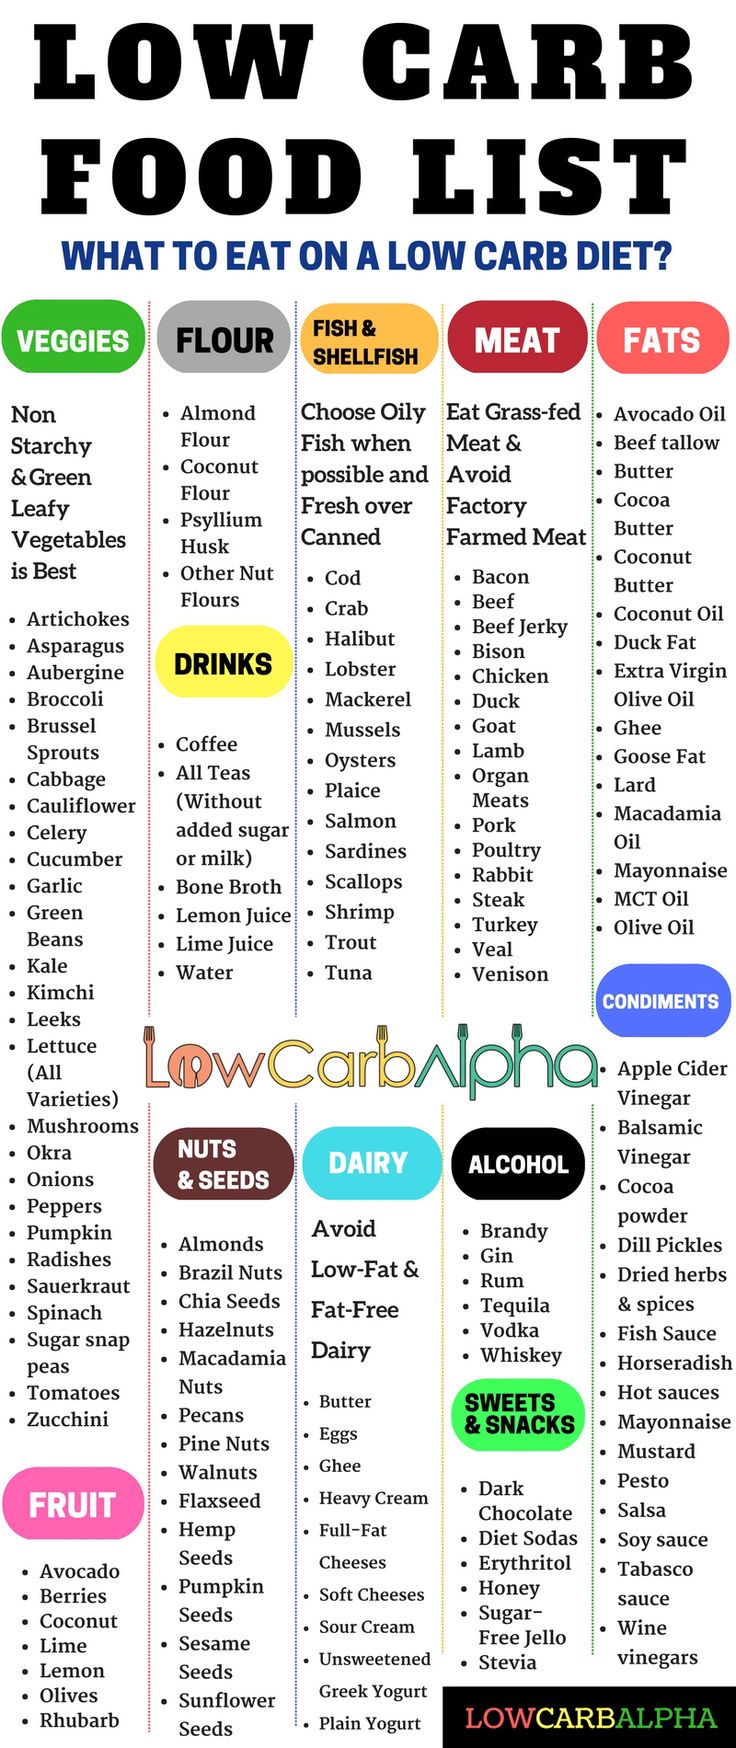 oils and fats canada food guide